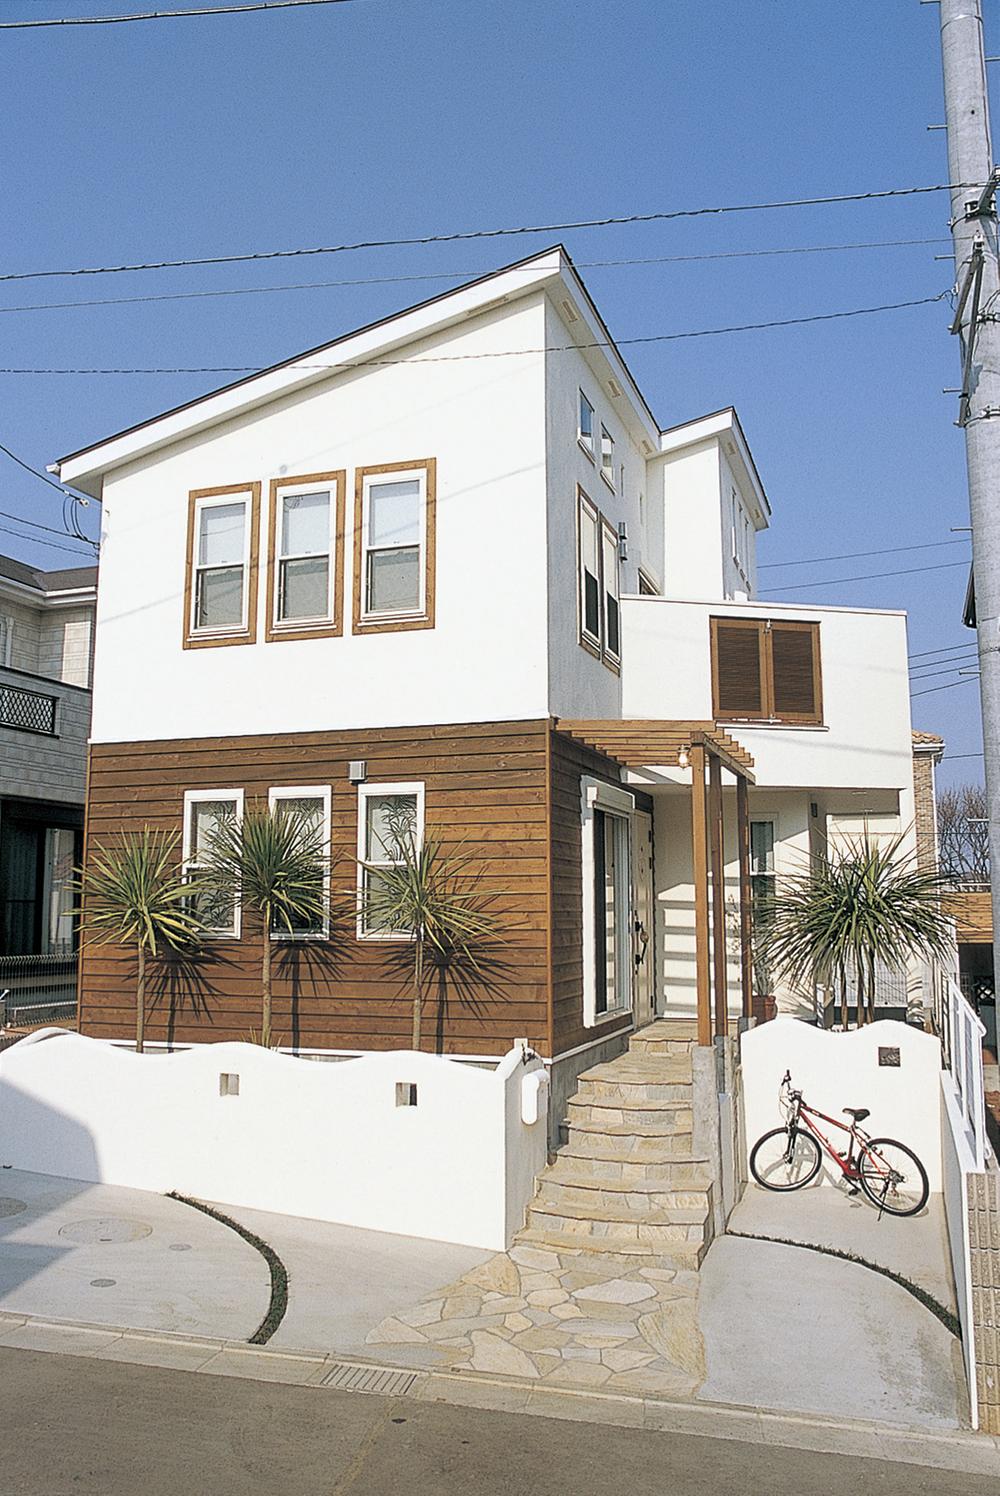 Building plan example (exterior photos). And building a simple, modern house in the blue sky of Shonan. 